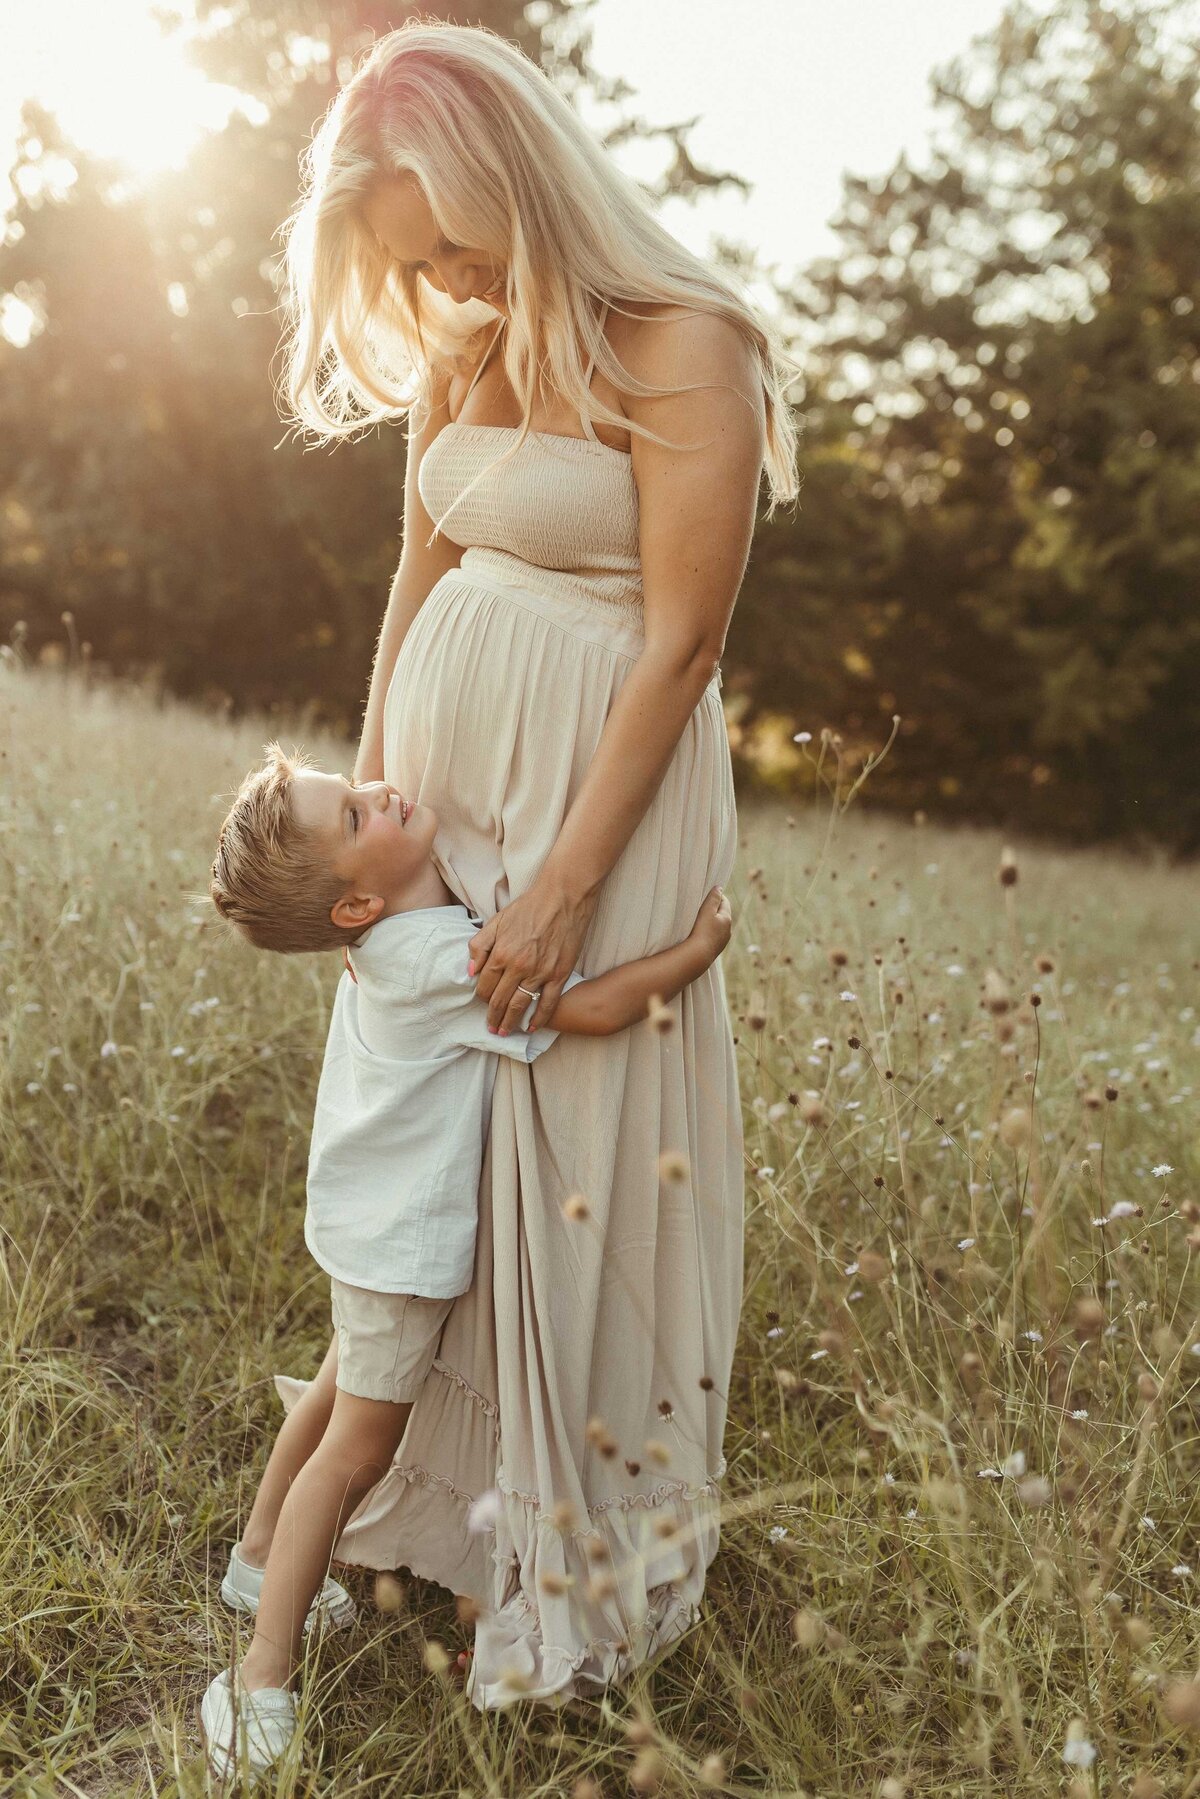 Blonde pregnant woman standing in a flower field with her young son hugging her hips